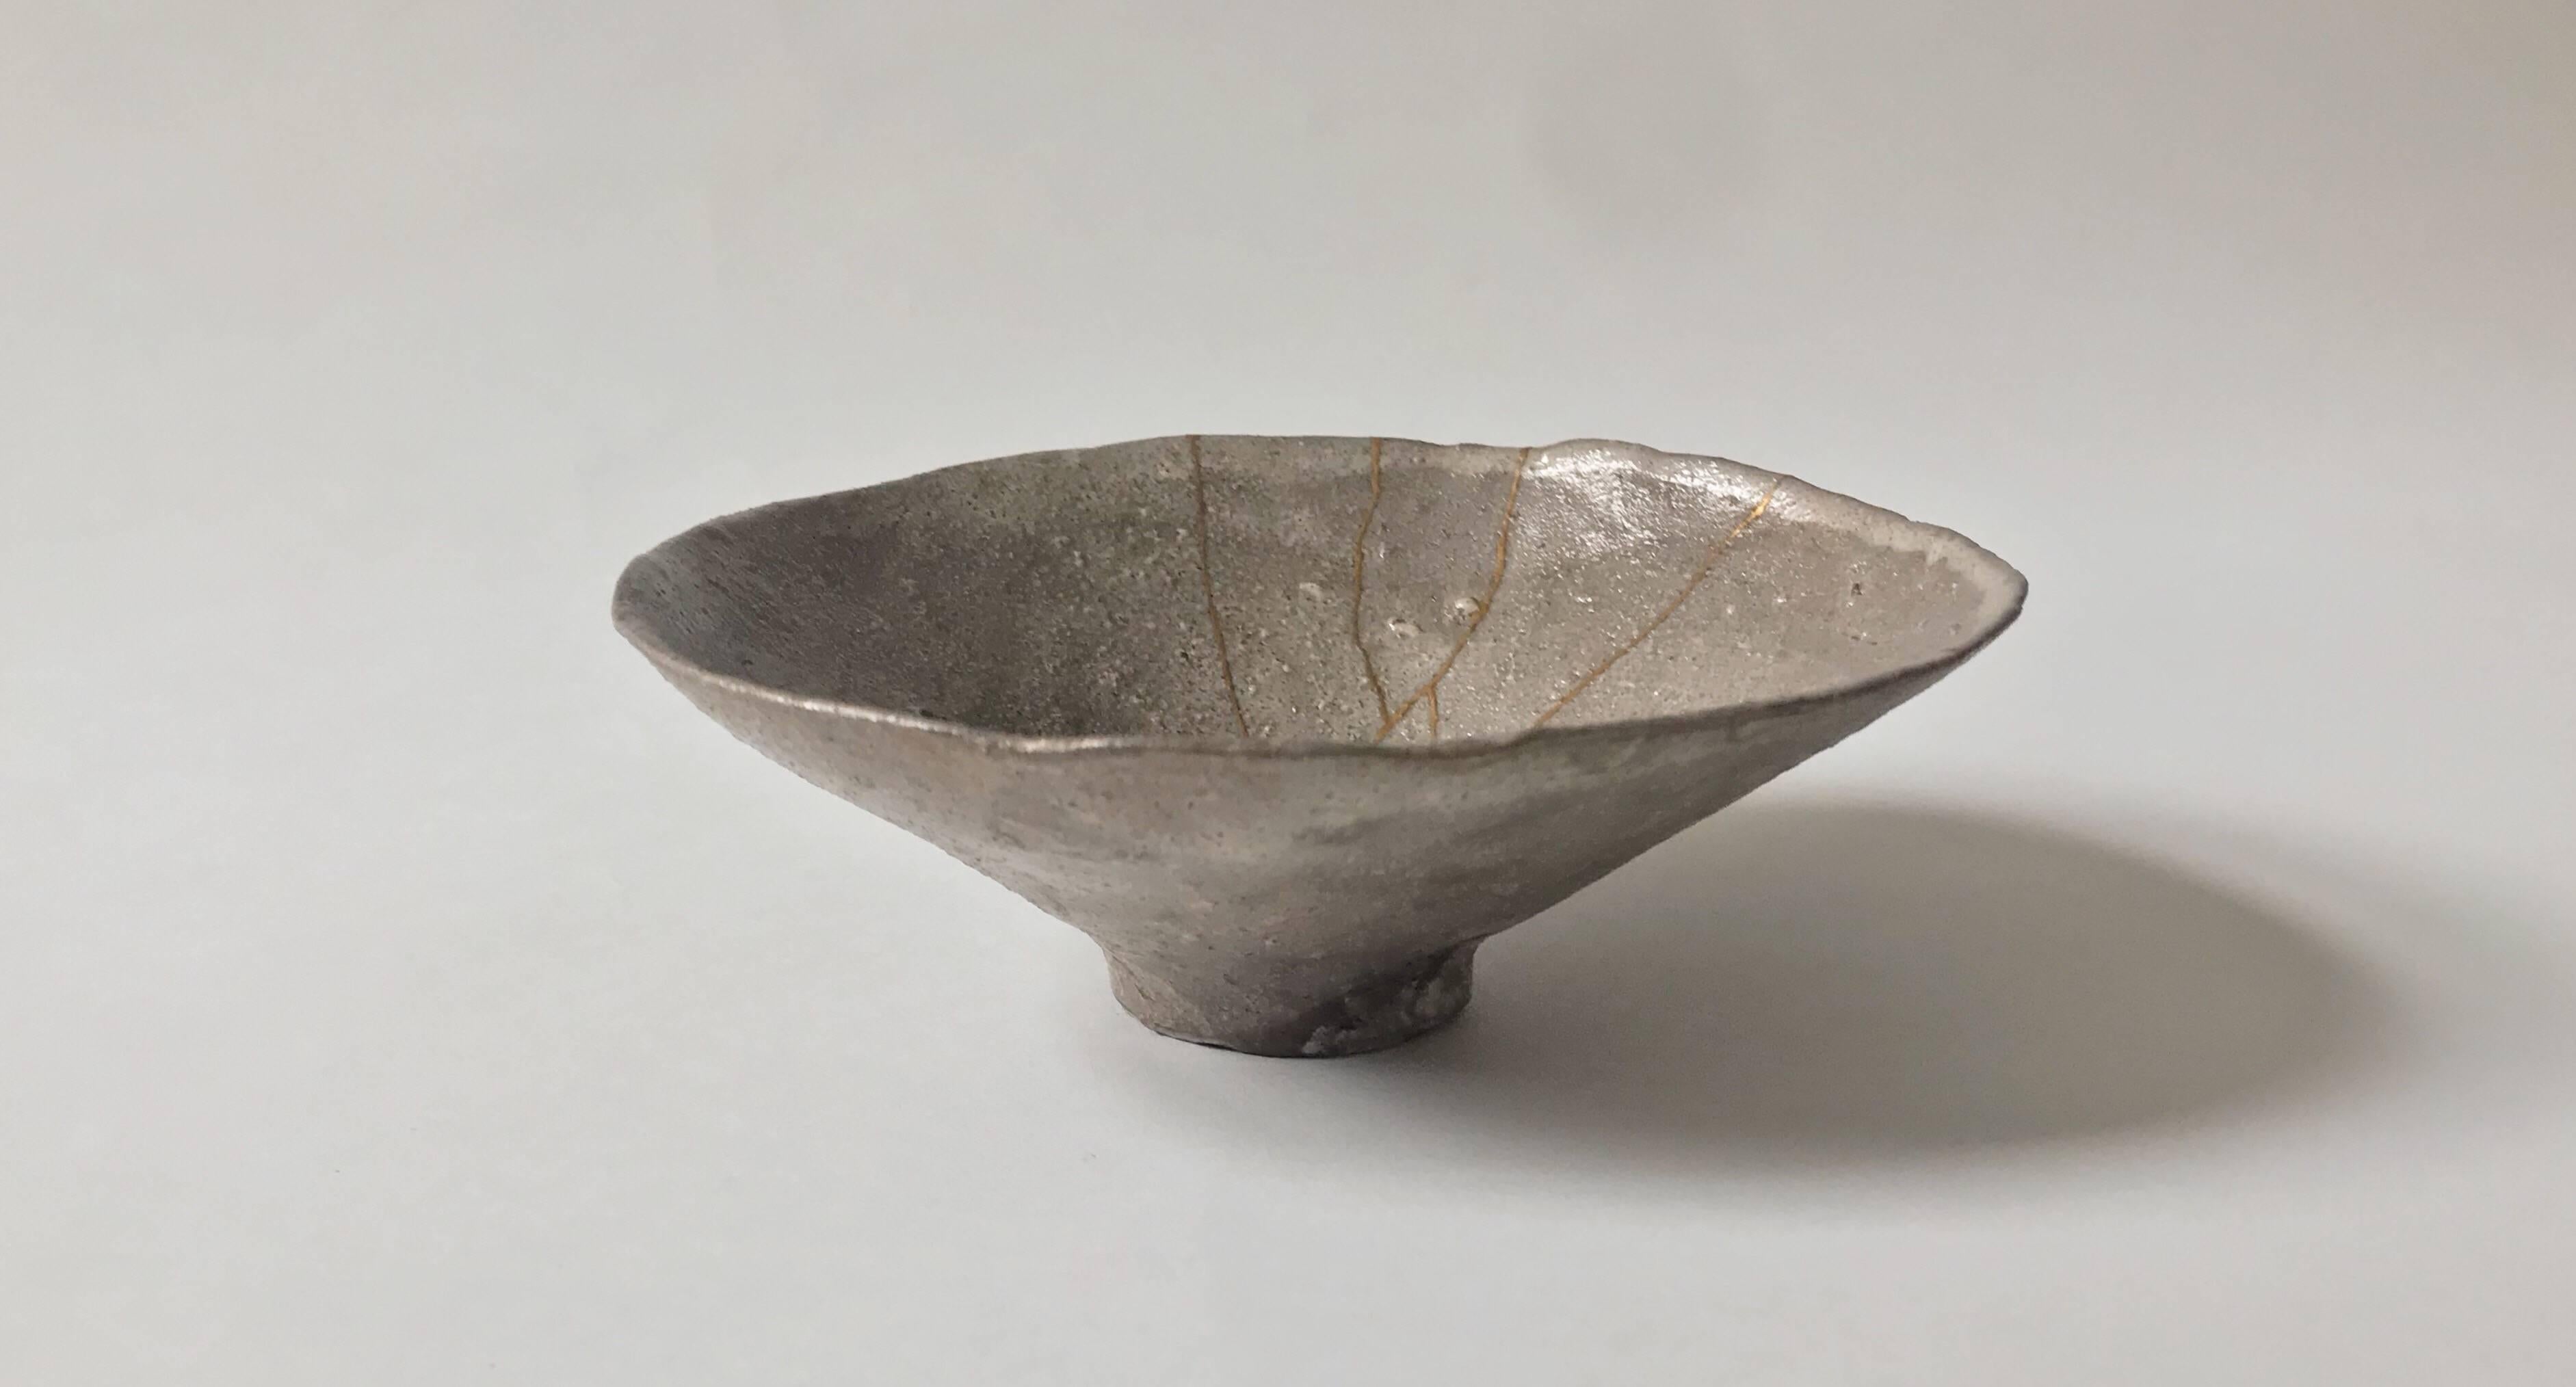 This Japanese ceramic bowl is by Shiro Shimizu, from his famous Kyoto studio. Shown in our Tea Ceremony exhibition which opened in May 2018.

The grandson of celebrated late ceramicist Uichi Shimizu, Shiro Shimizu hails from a lineage of pottery